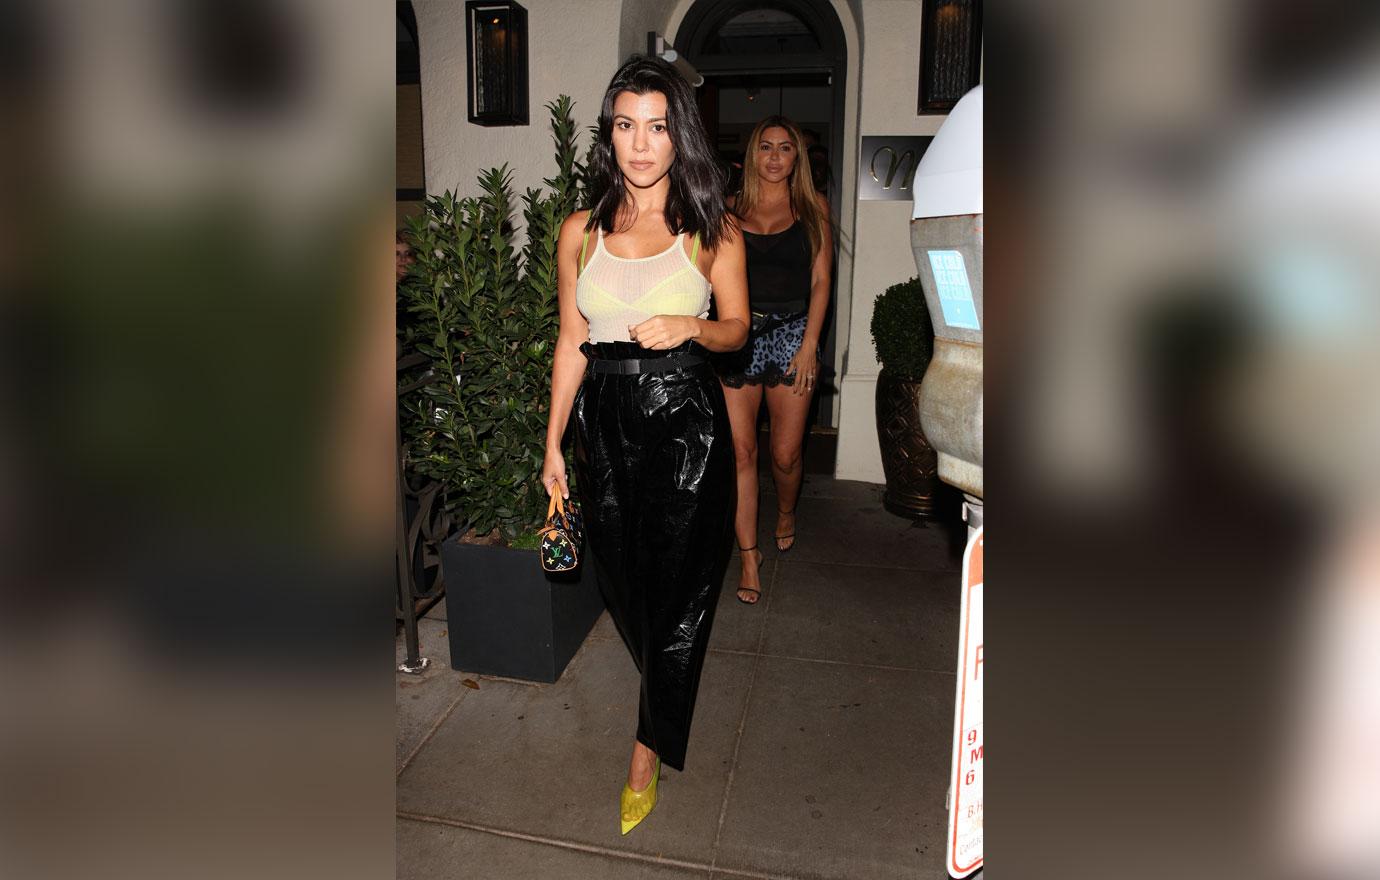 Kourtney Flashes Bra in Sheer Top While in NYC With Kylie